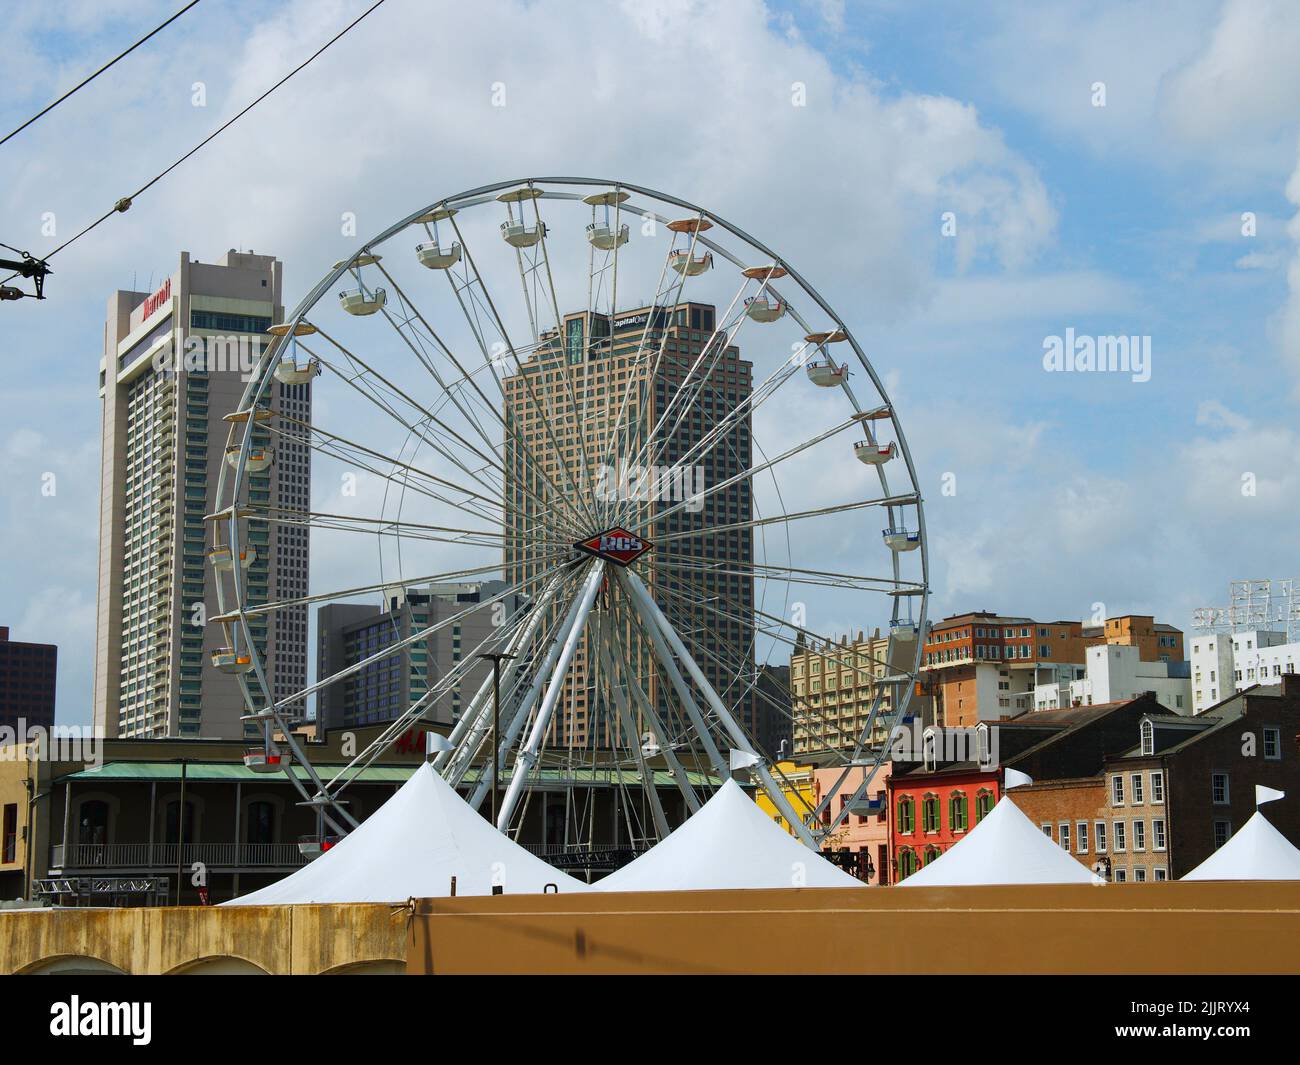 The Ferris wheel setup in the French Quarter of New Orleans for the NCAA Final Four Music Festival. Stock Photo